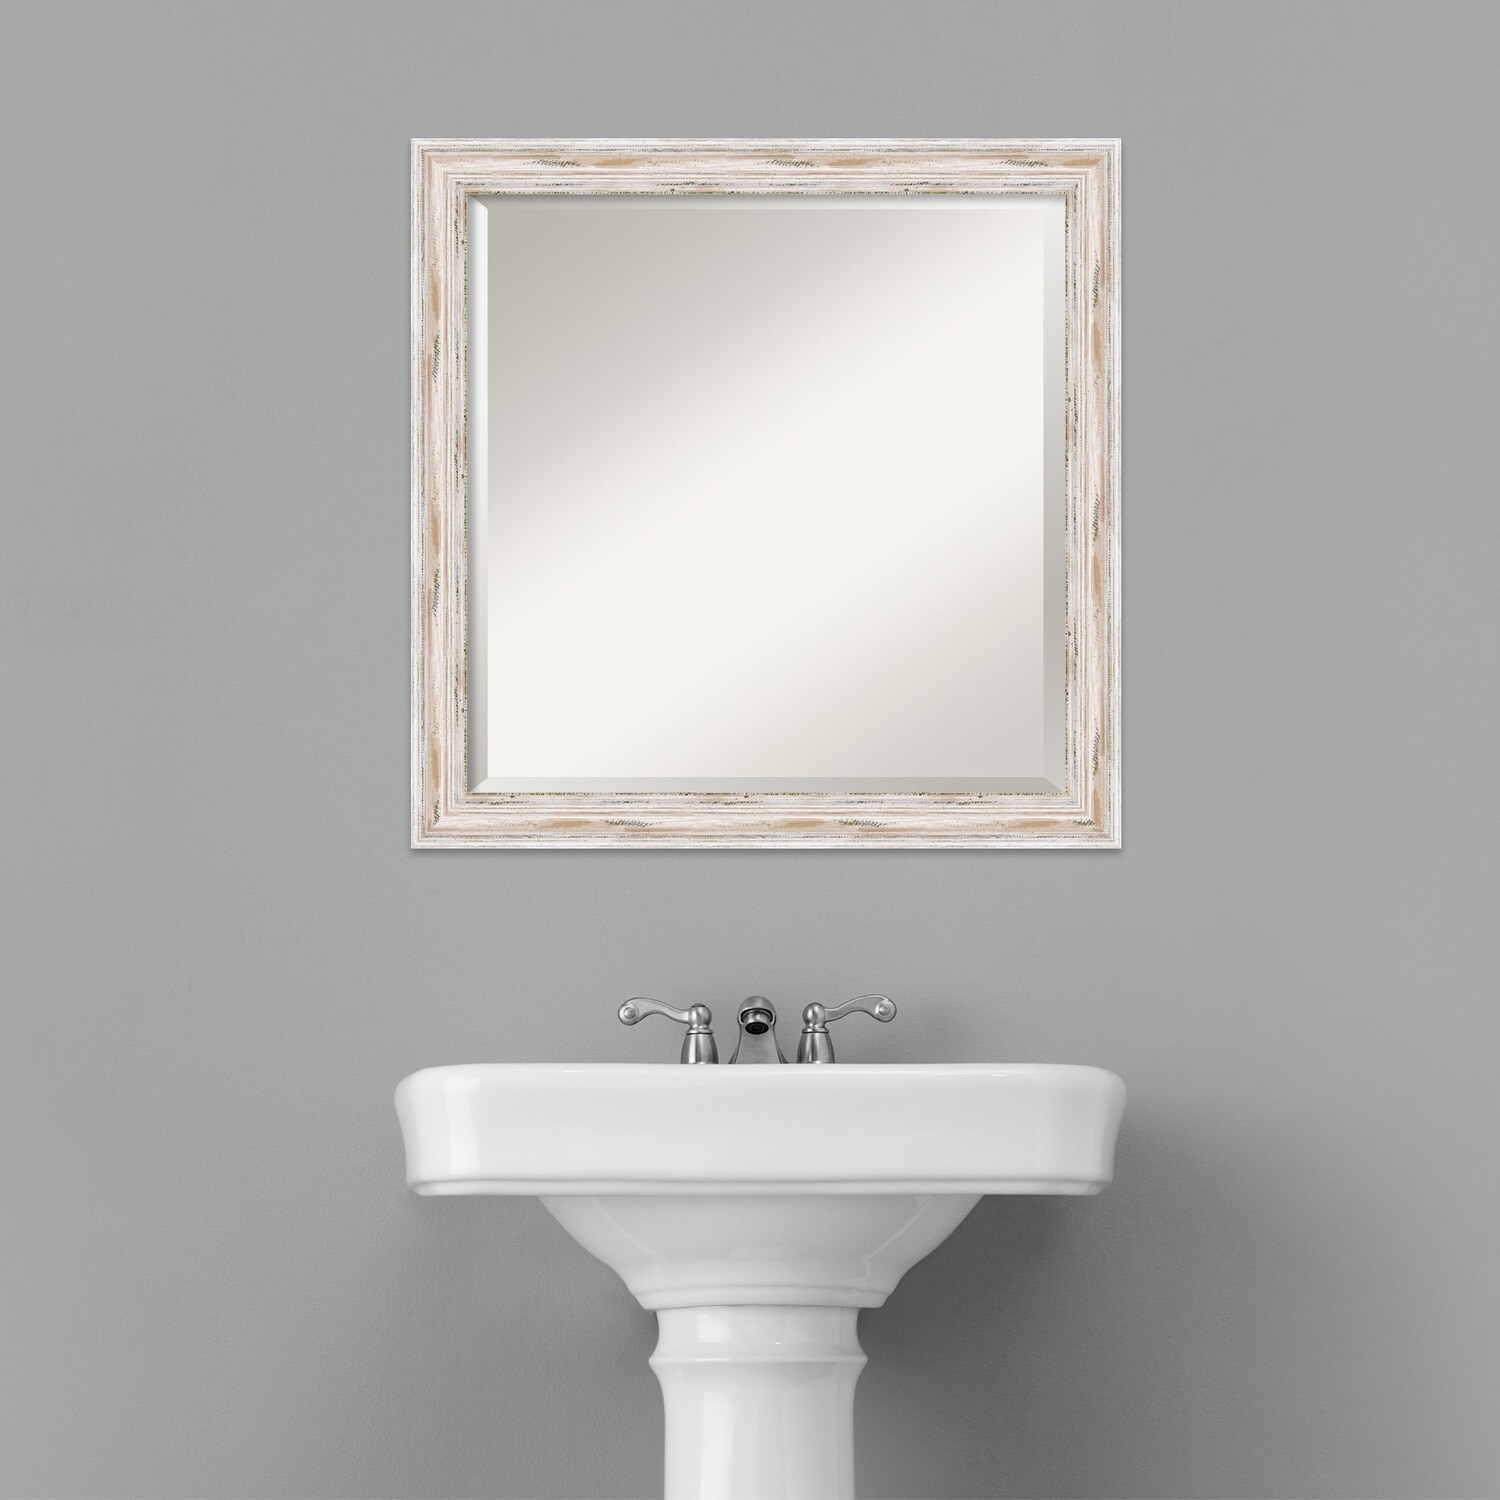 Beveled Wood Bathroom Wall Mirror - Alexandria White Wash Narrow Frame - Outer Size: 23 x 23 in